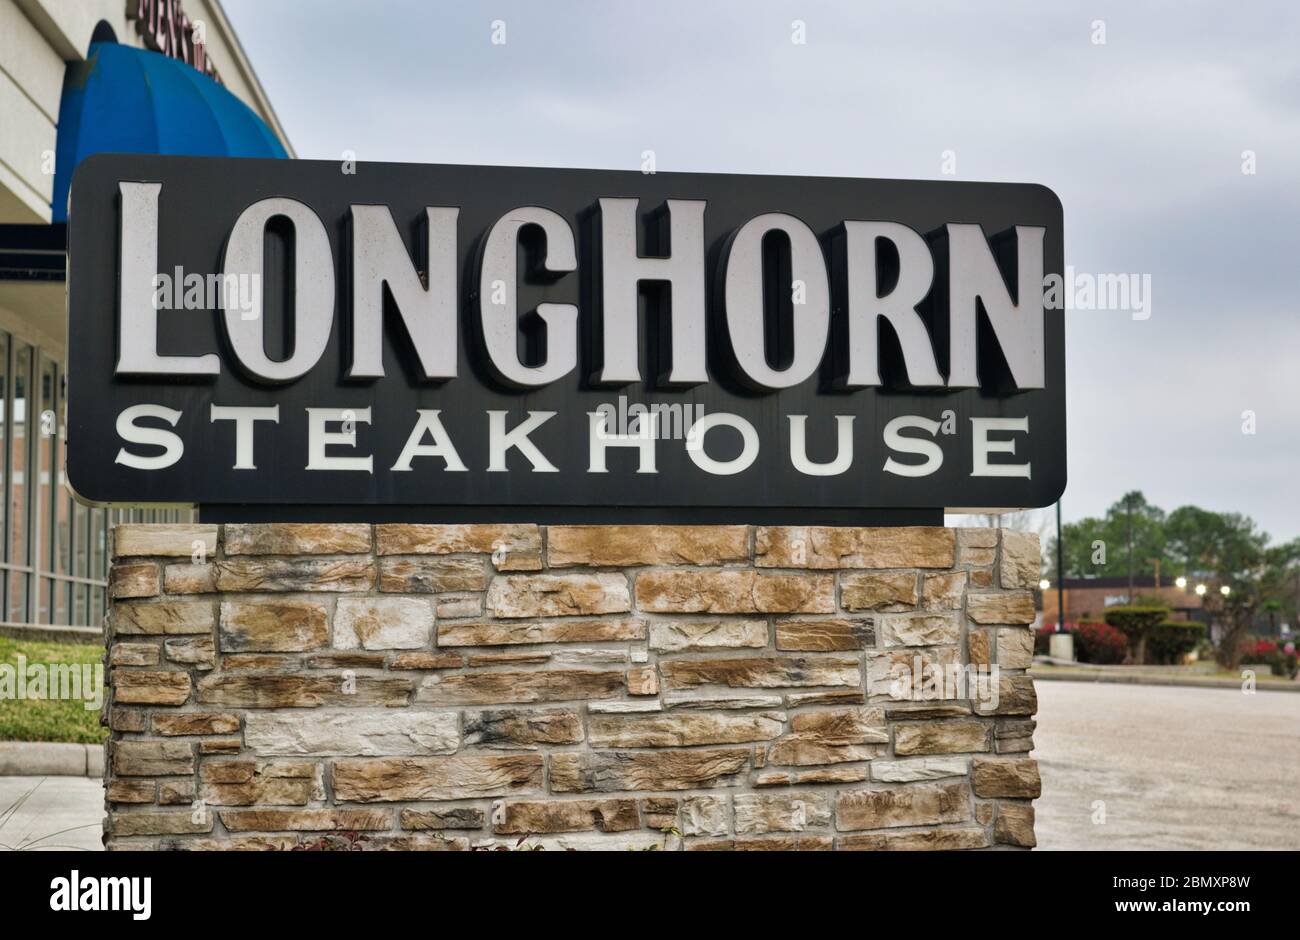 Longhorn Steakhouse sign in Deerbrook Mall in Humble, TX. A popular American steakhouse founded in 1981 with a Western-Texan theme. Stock Photo